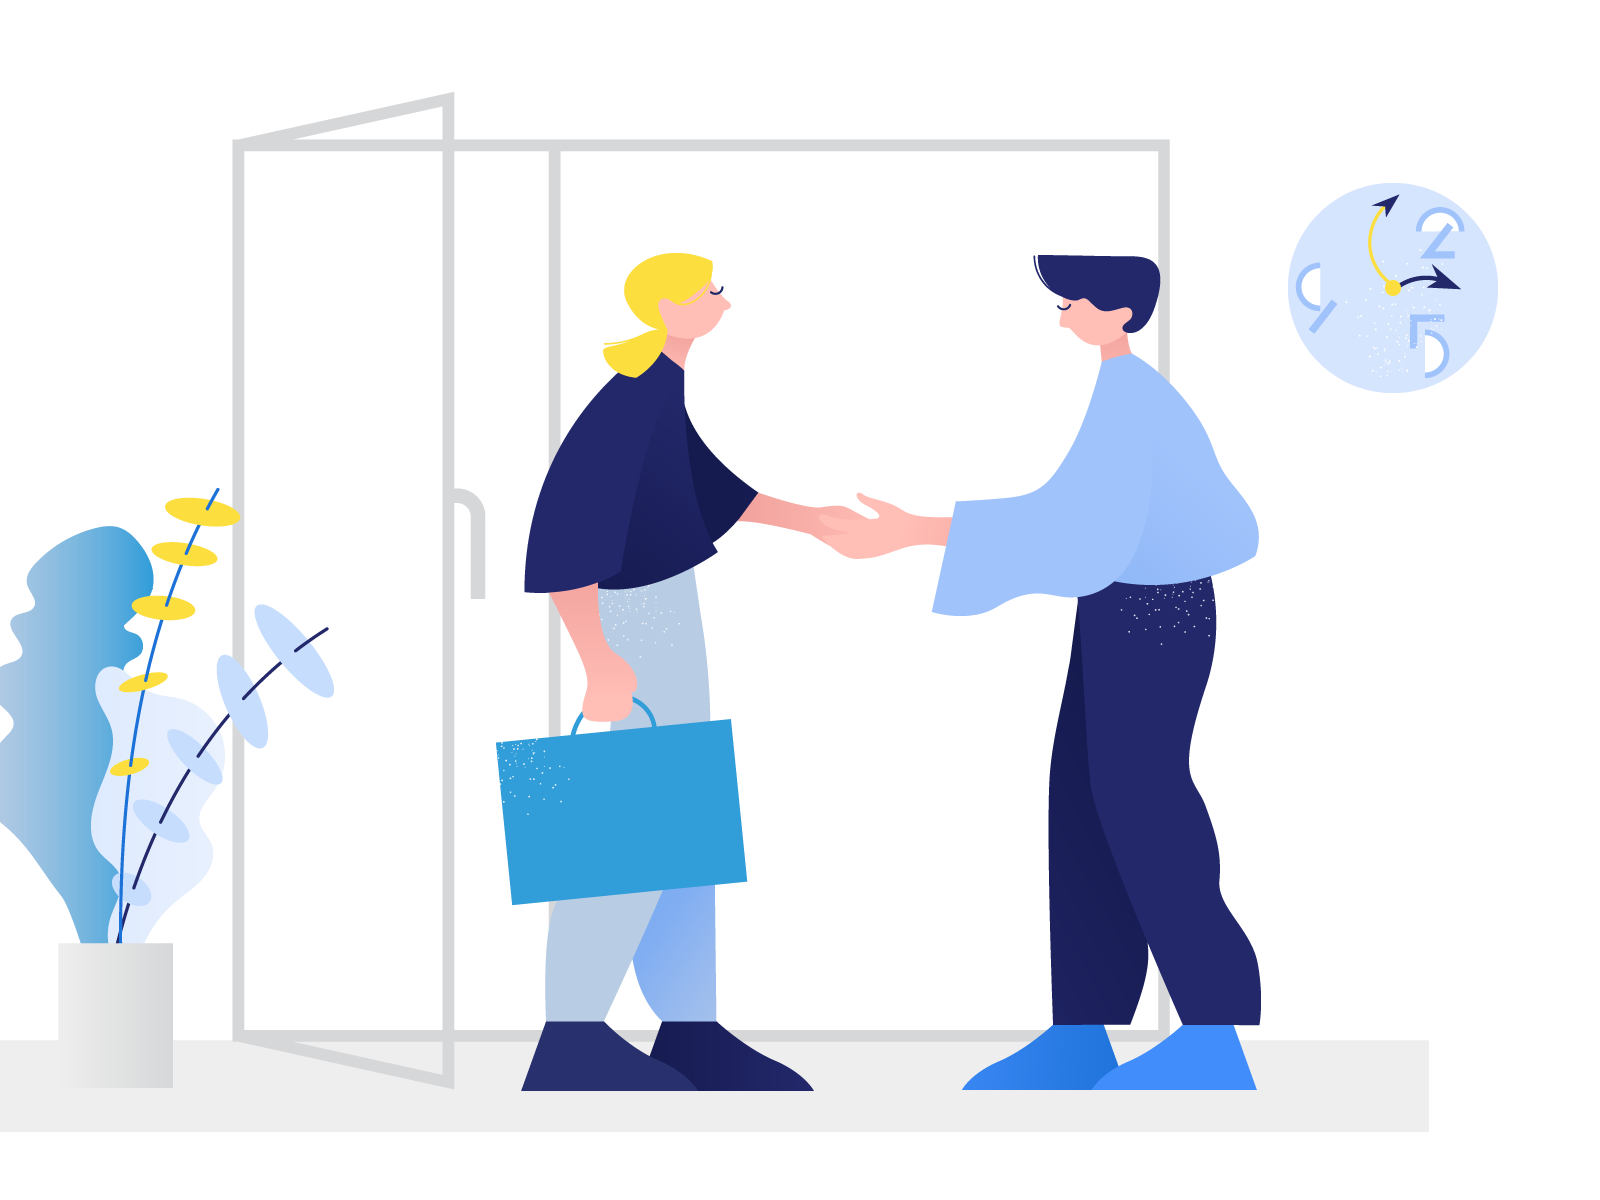 Illustration of two business people shaking hands.